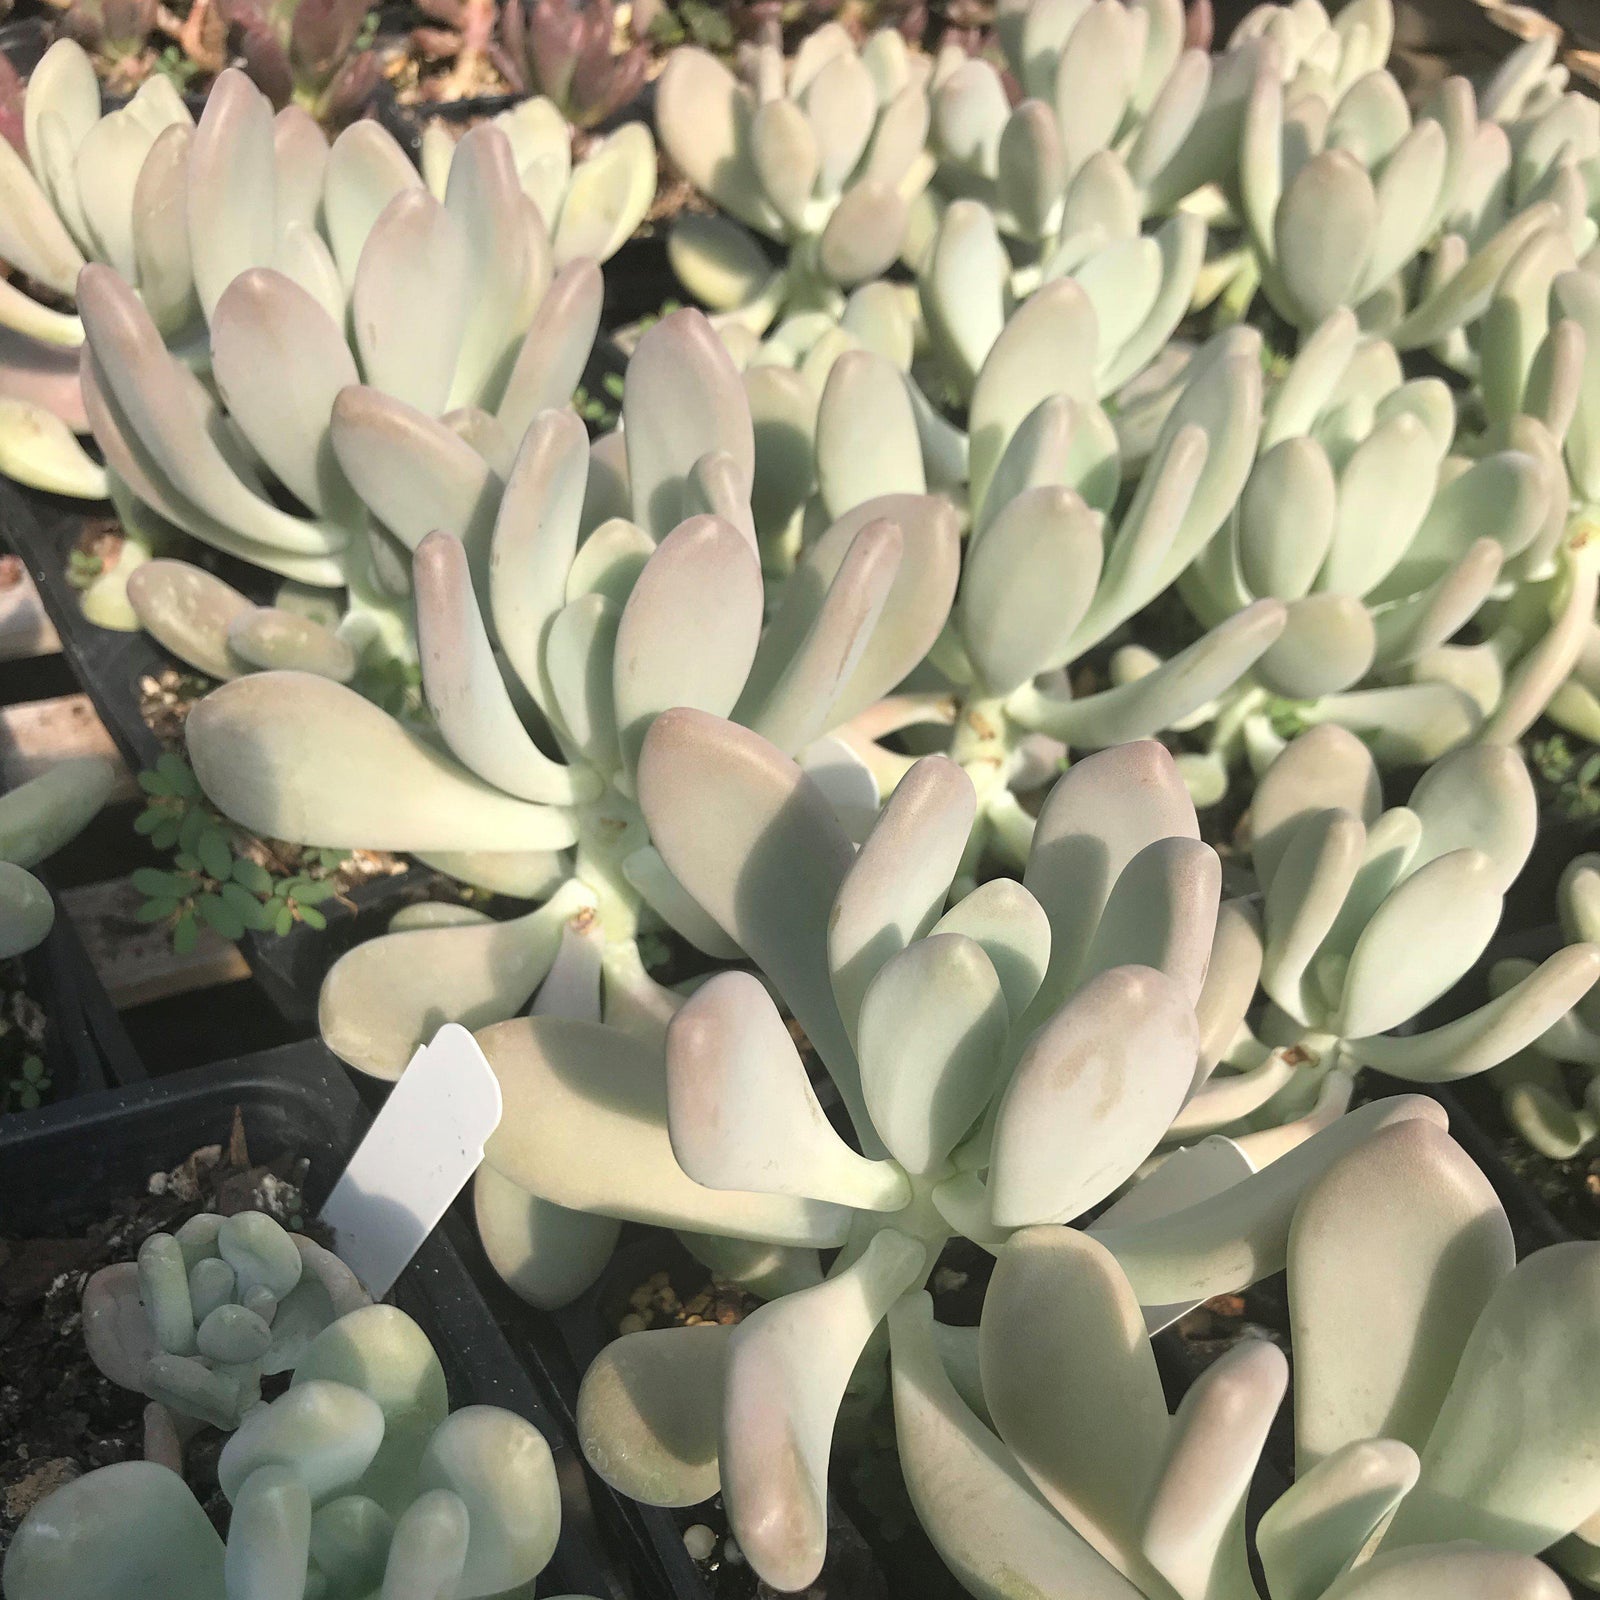 Pachyphytum bracteosum ~ Silver Bracts, Moon Stones - Delivered By ServeScape